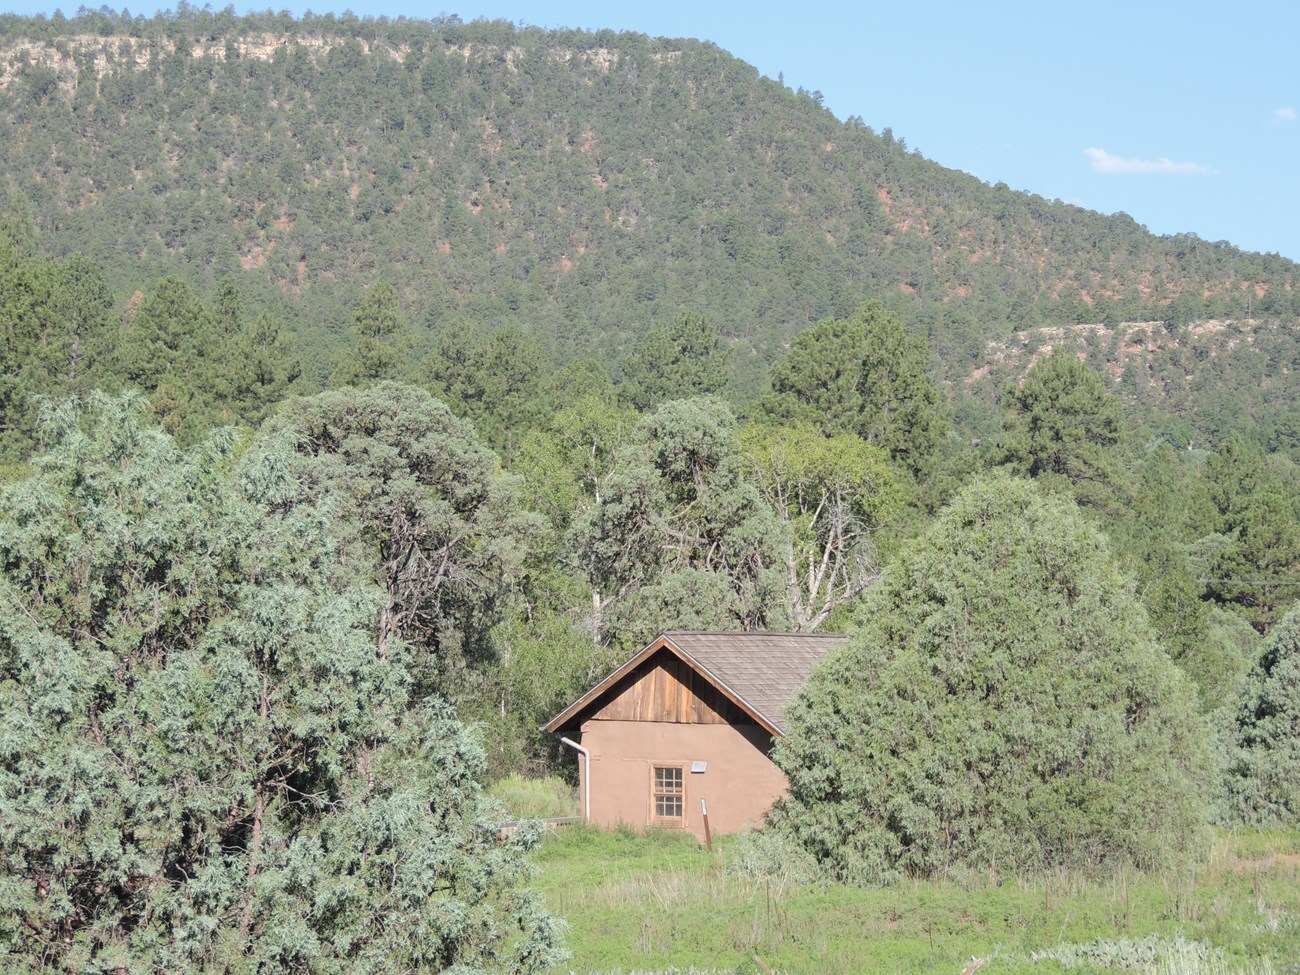 Picture of Pigeon's Ranch with Glorieta Mesa in the background.